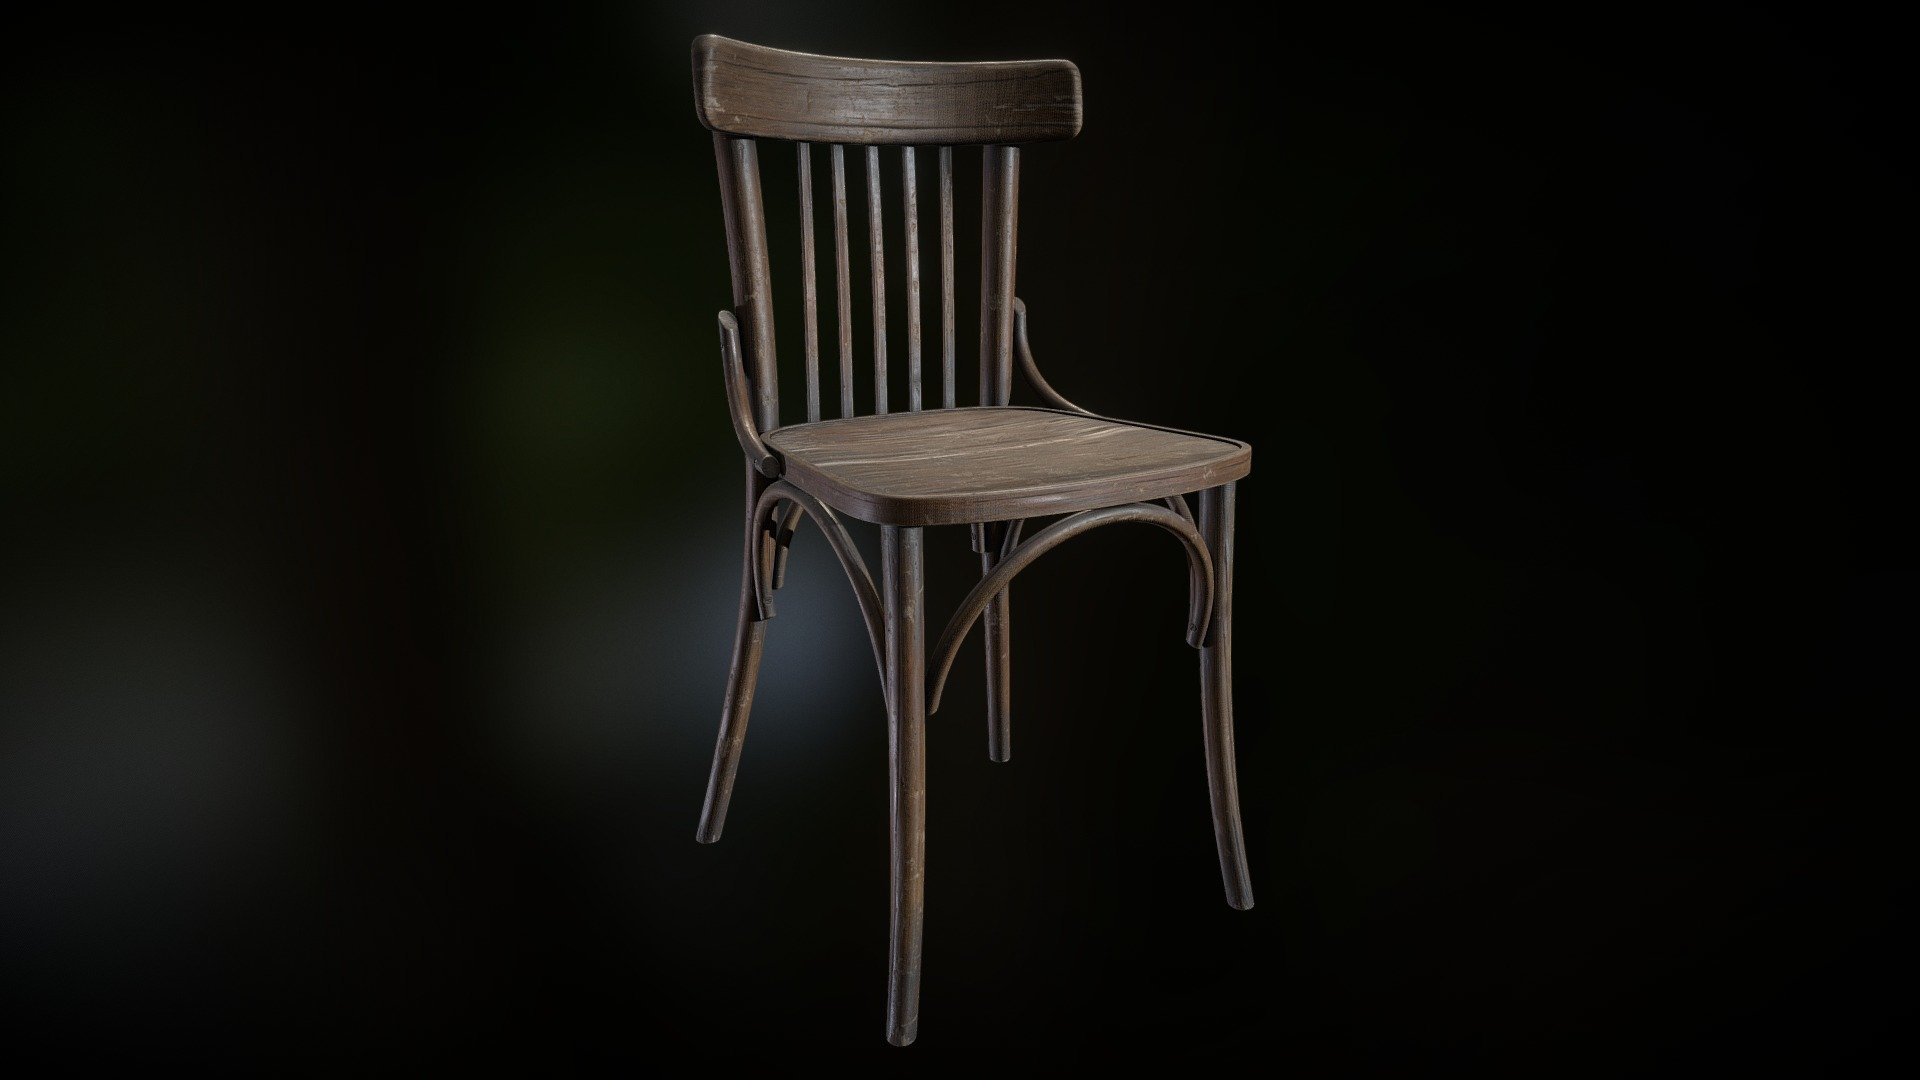 Free to download and use! Enjoy! :)

Old Irish chair- modelled in Blender 3.4 , unwrapped in RizomUV. Textured and baked in Substence Painter. 1 sets of 8k PBR textures. 8k textures for OpenGL and a model in fbx format can be downloaded in the attached zip file.

This work is part of a study , I loved doing it and I’m very happy with the result!

Hope you like it, high five! ) - Old Irish chair 8K [Downloadable] - Download Free 3D model by 🌴𝓜𝓪𝓻𝓽𝓪𝓻𝓴🌴 (@adyatttt) 3d model